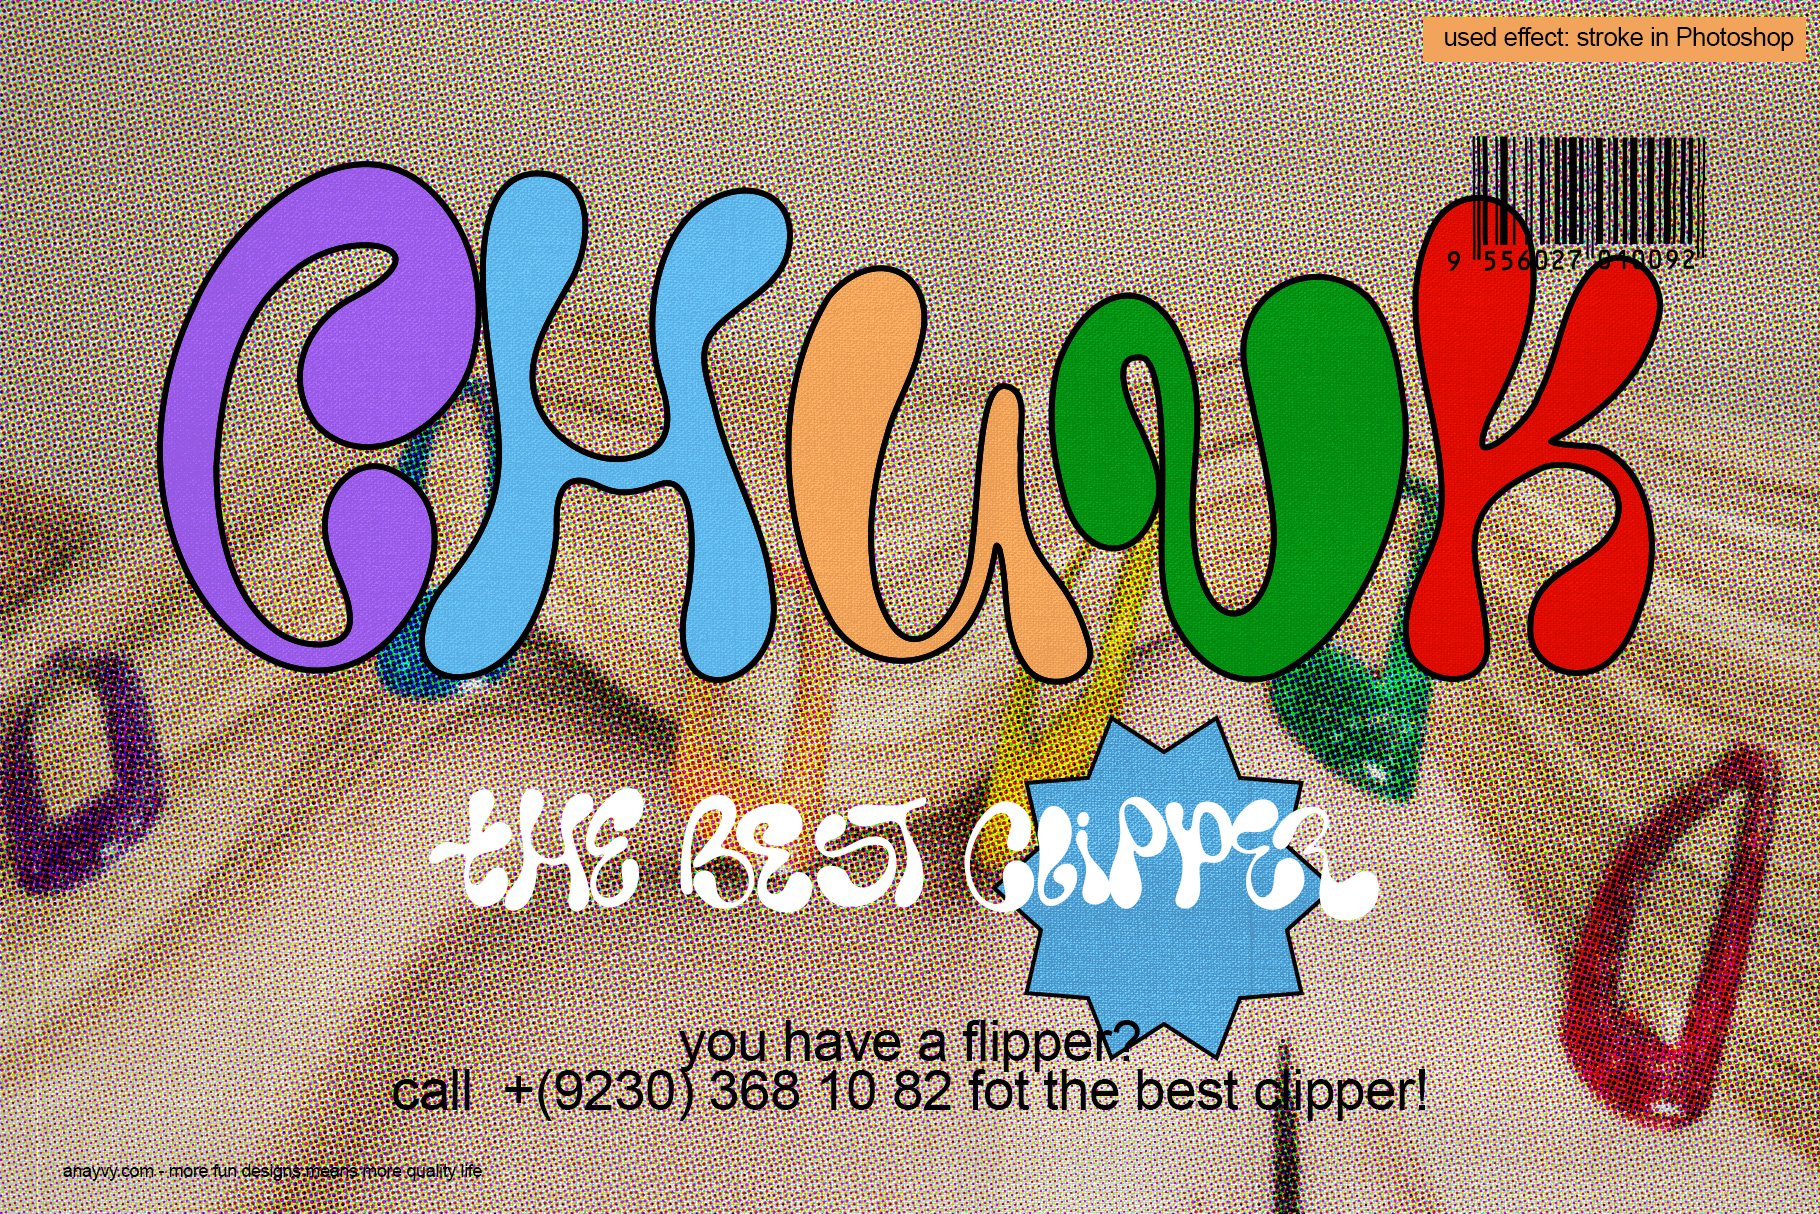 wobbly psychedelic trippy font liquid bubble y2k 2000 hippie ant design ana yvy 06 453